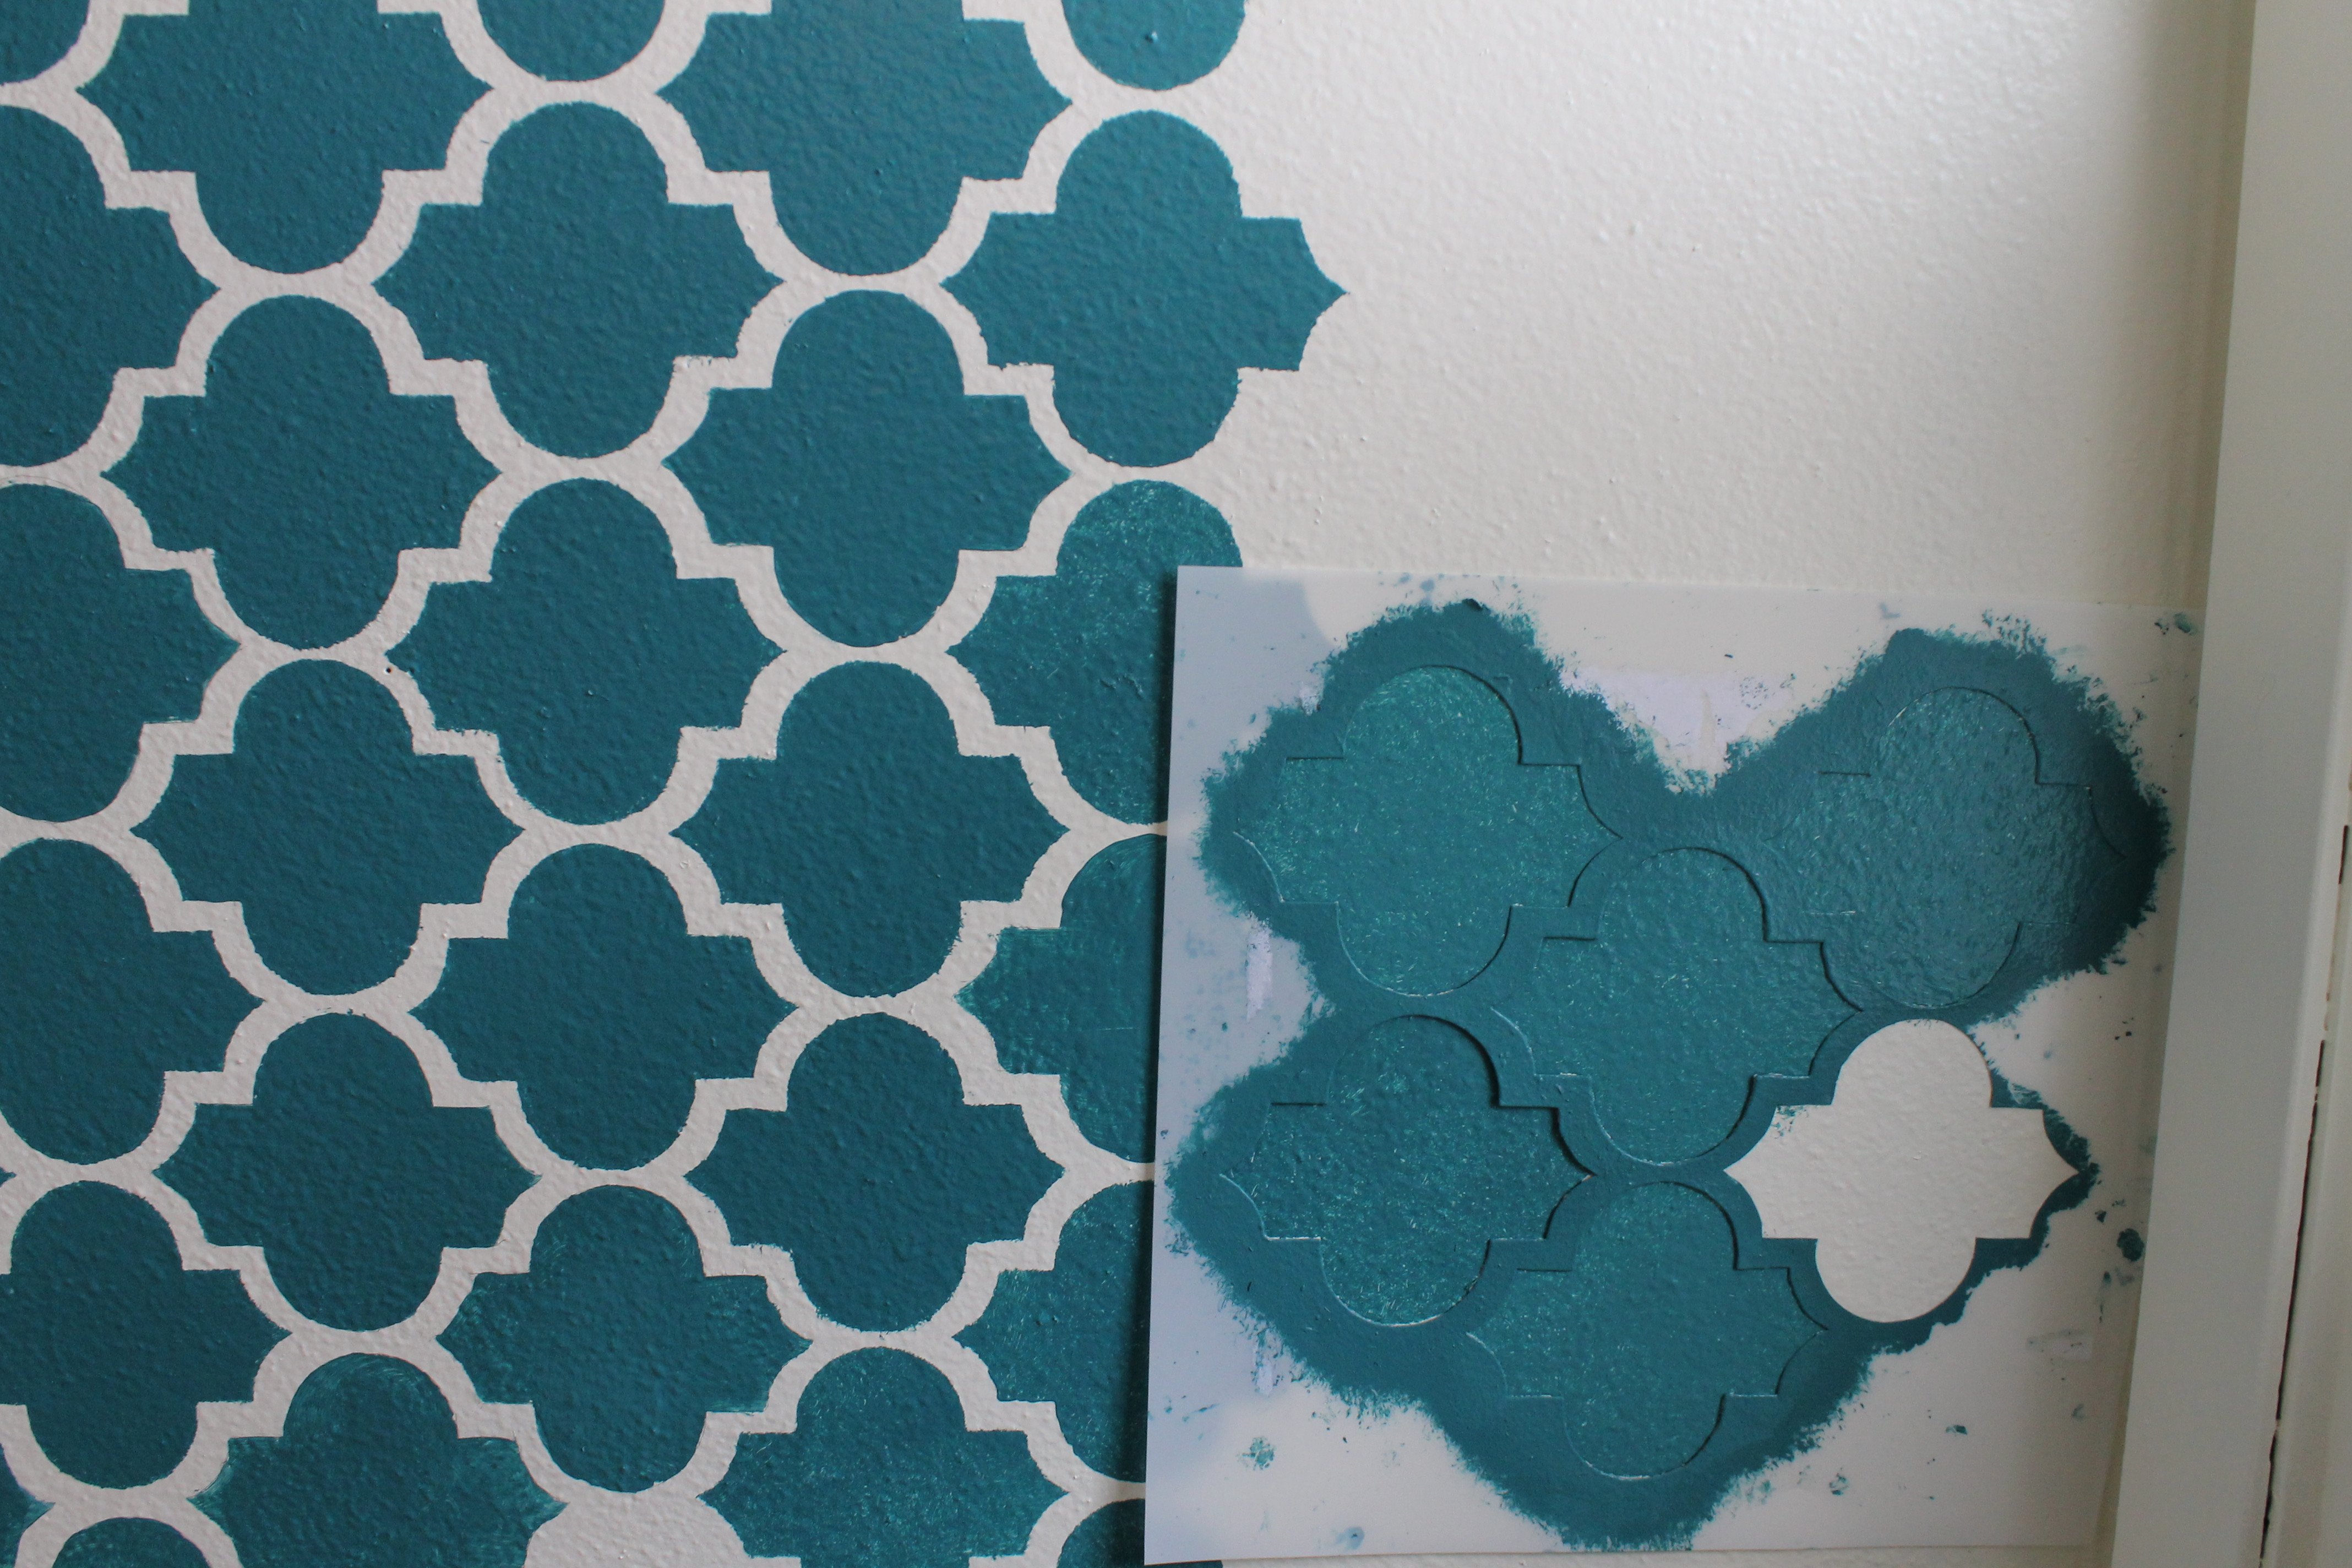 Making a Big Impact in a Small Space with Wall Stenciling